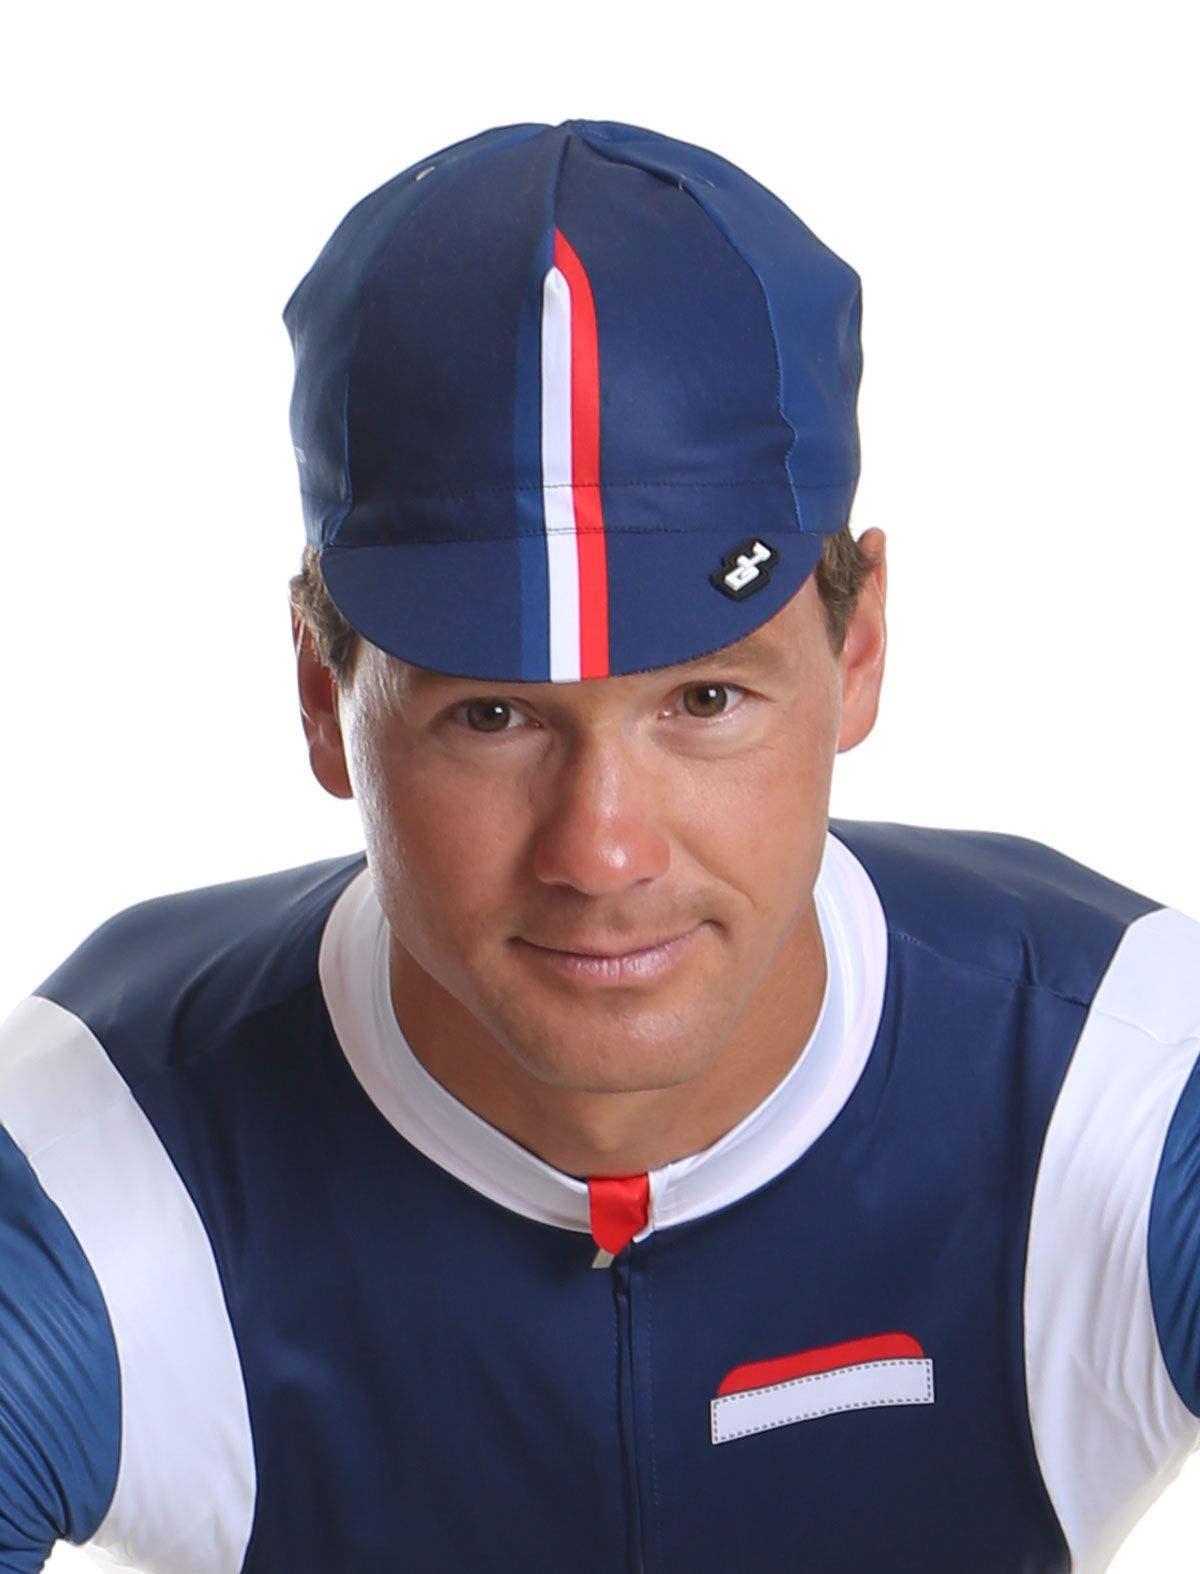 national cap and sportswear